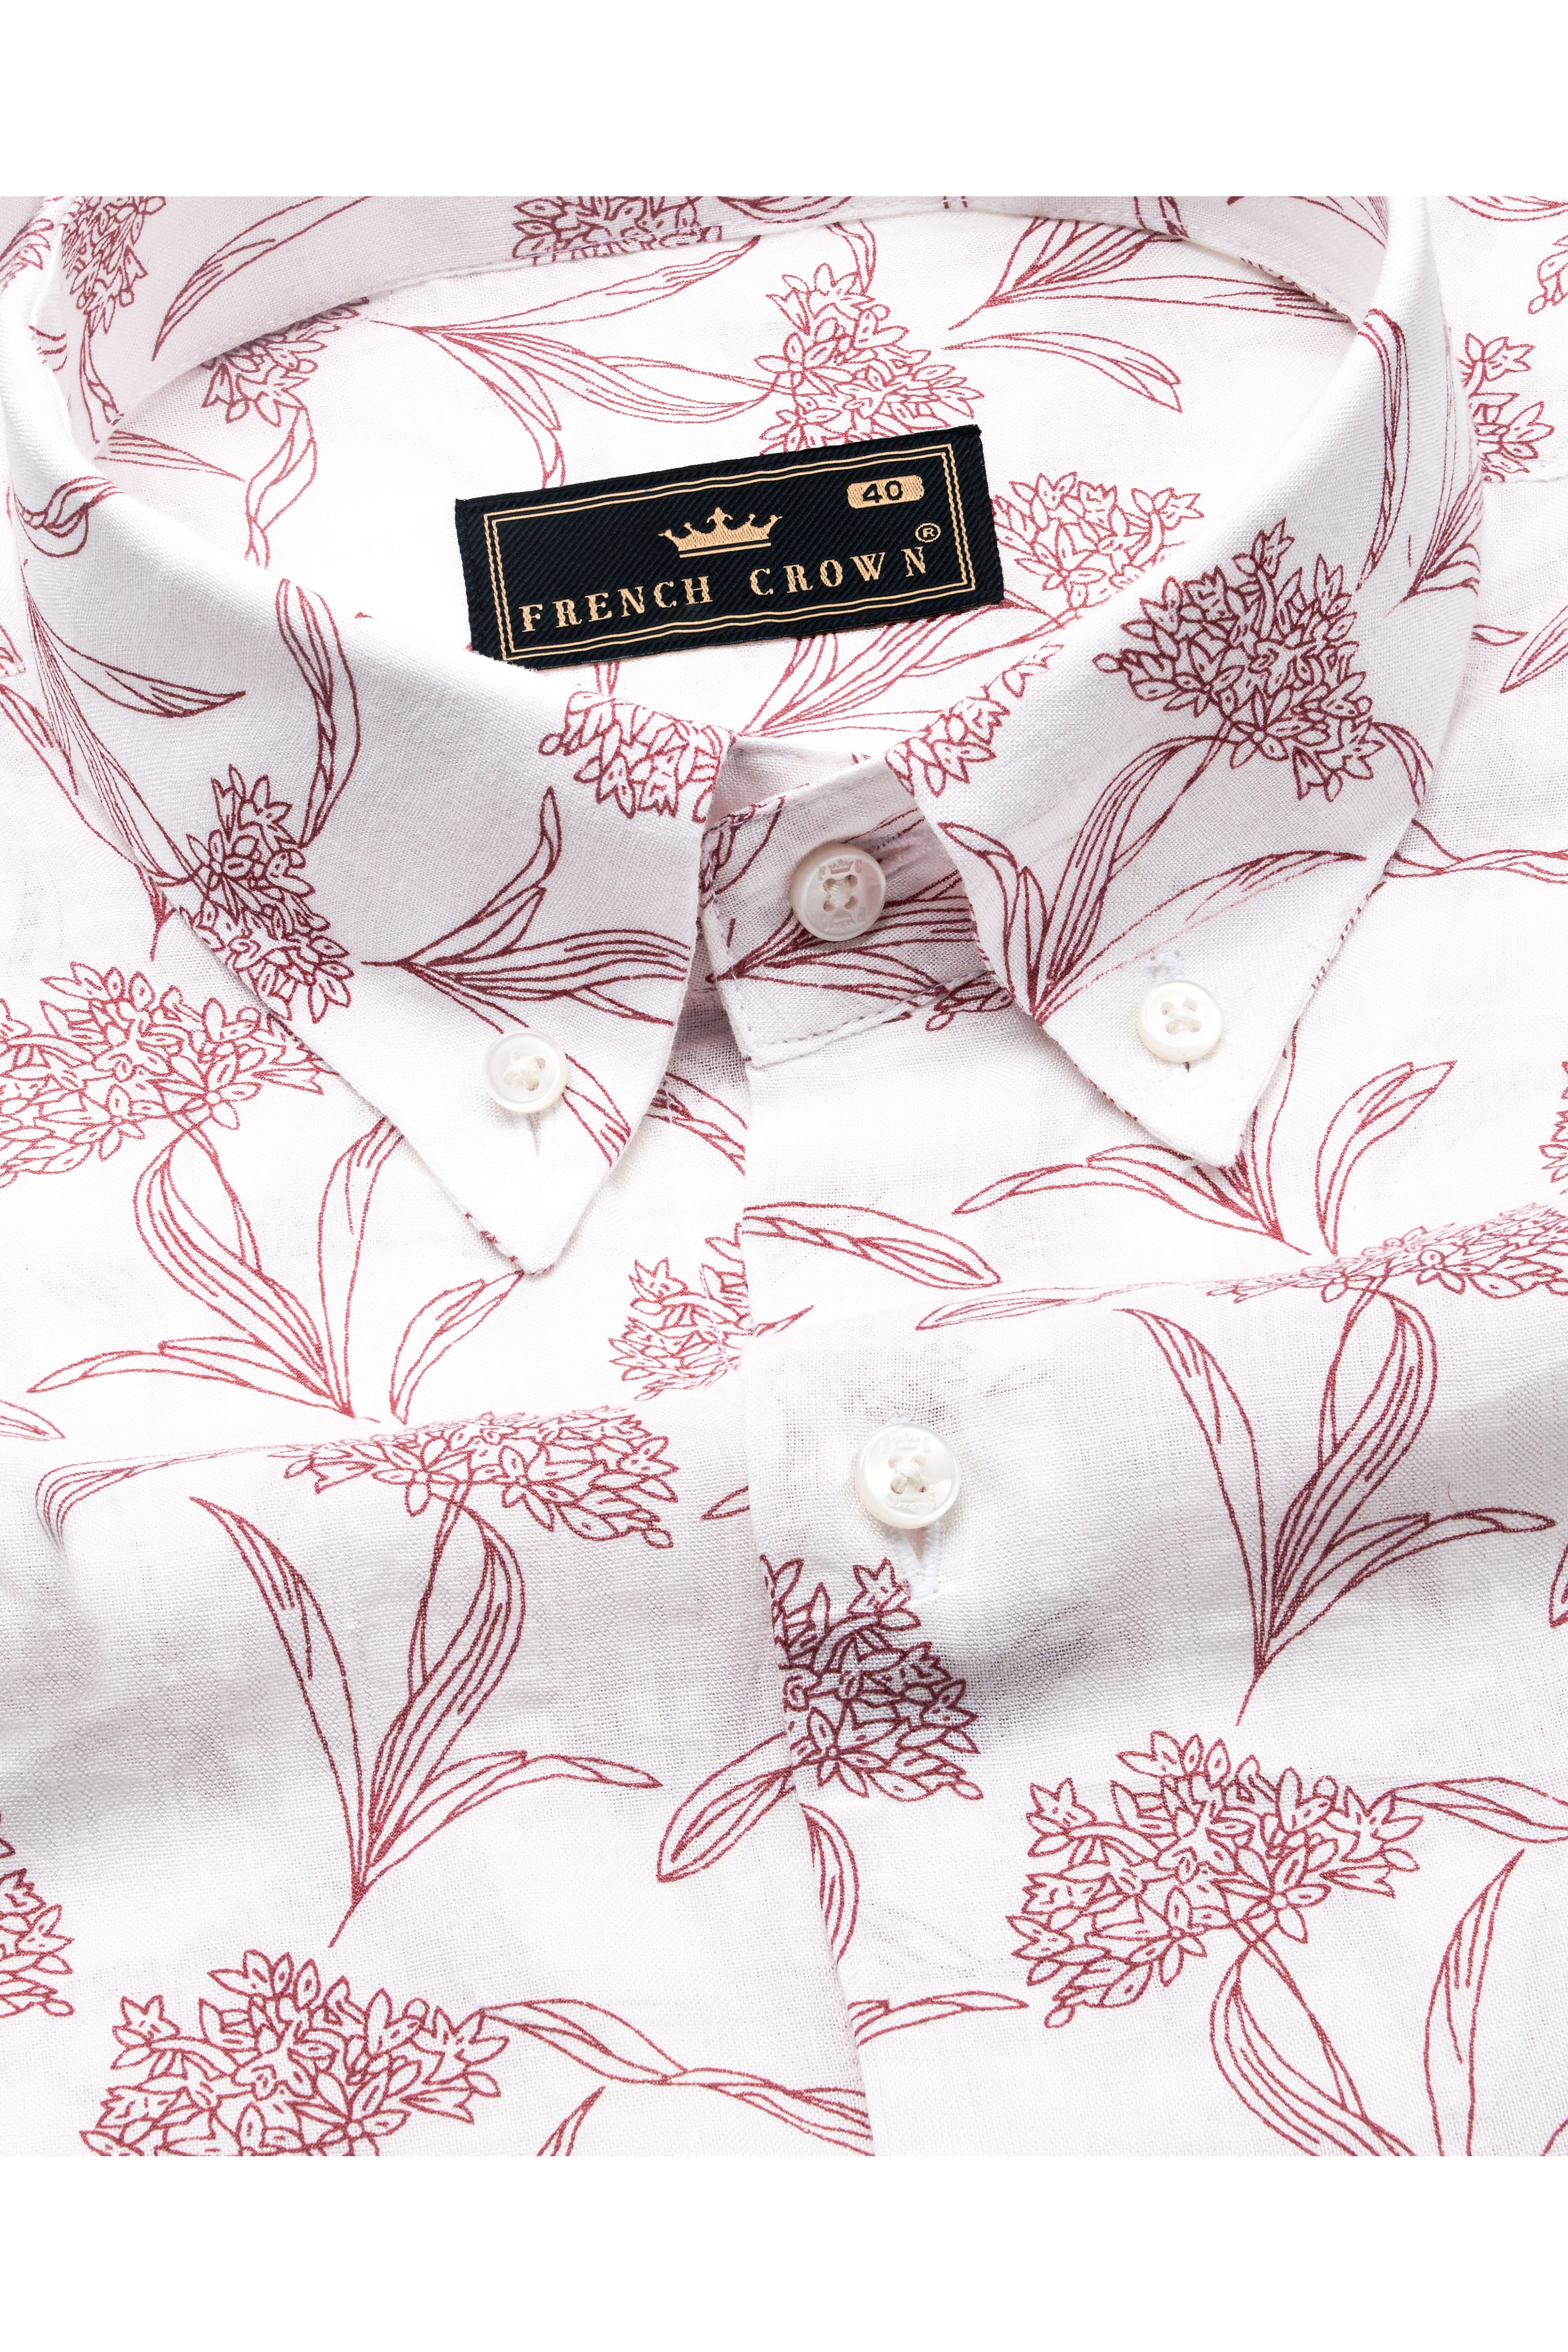 Bright White with Cordovan Maroon Floral Printed Lightweight Oversized Premium Cotton Shirt